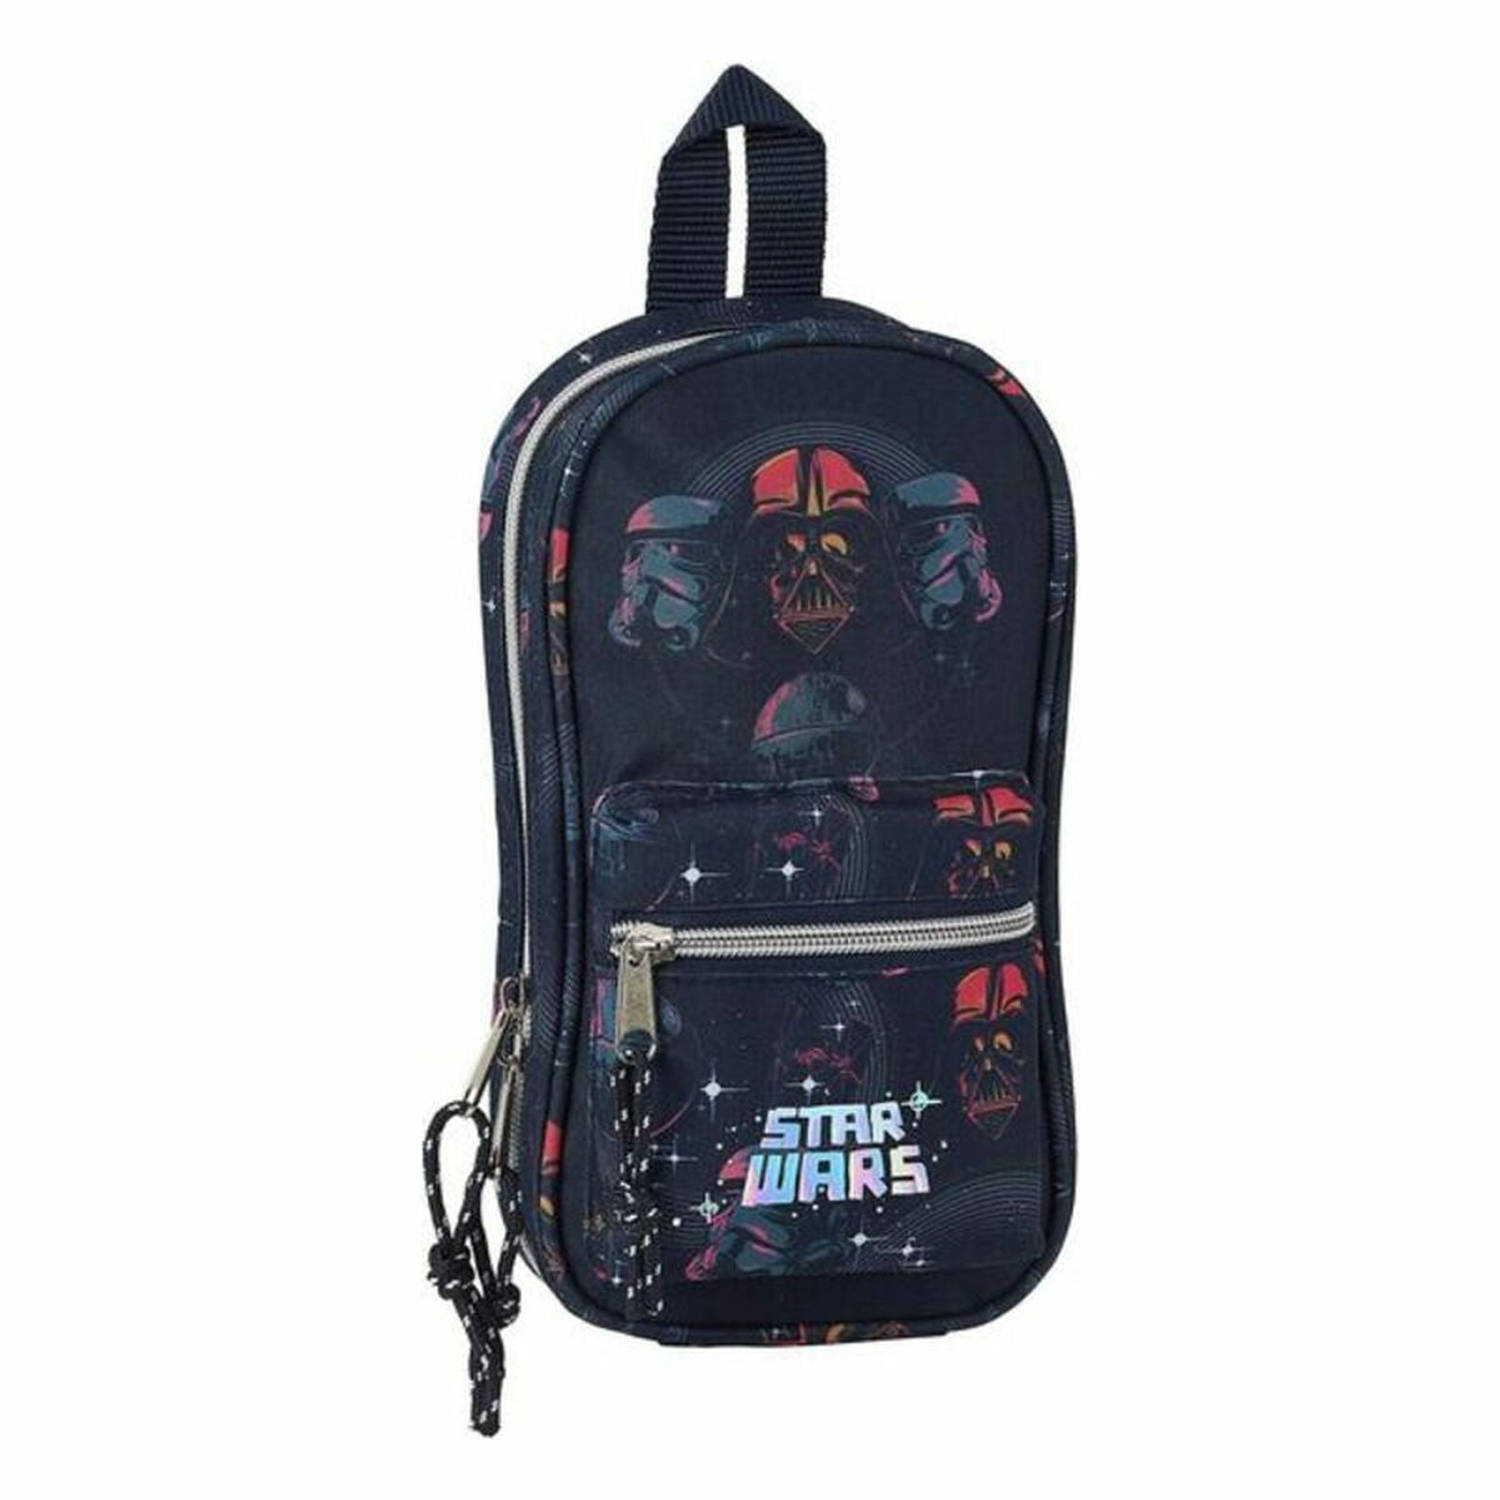 Star Wars Make-up Bag With 4 Feathers, 120 X 50 X 230 Mm